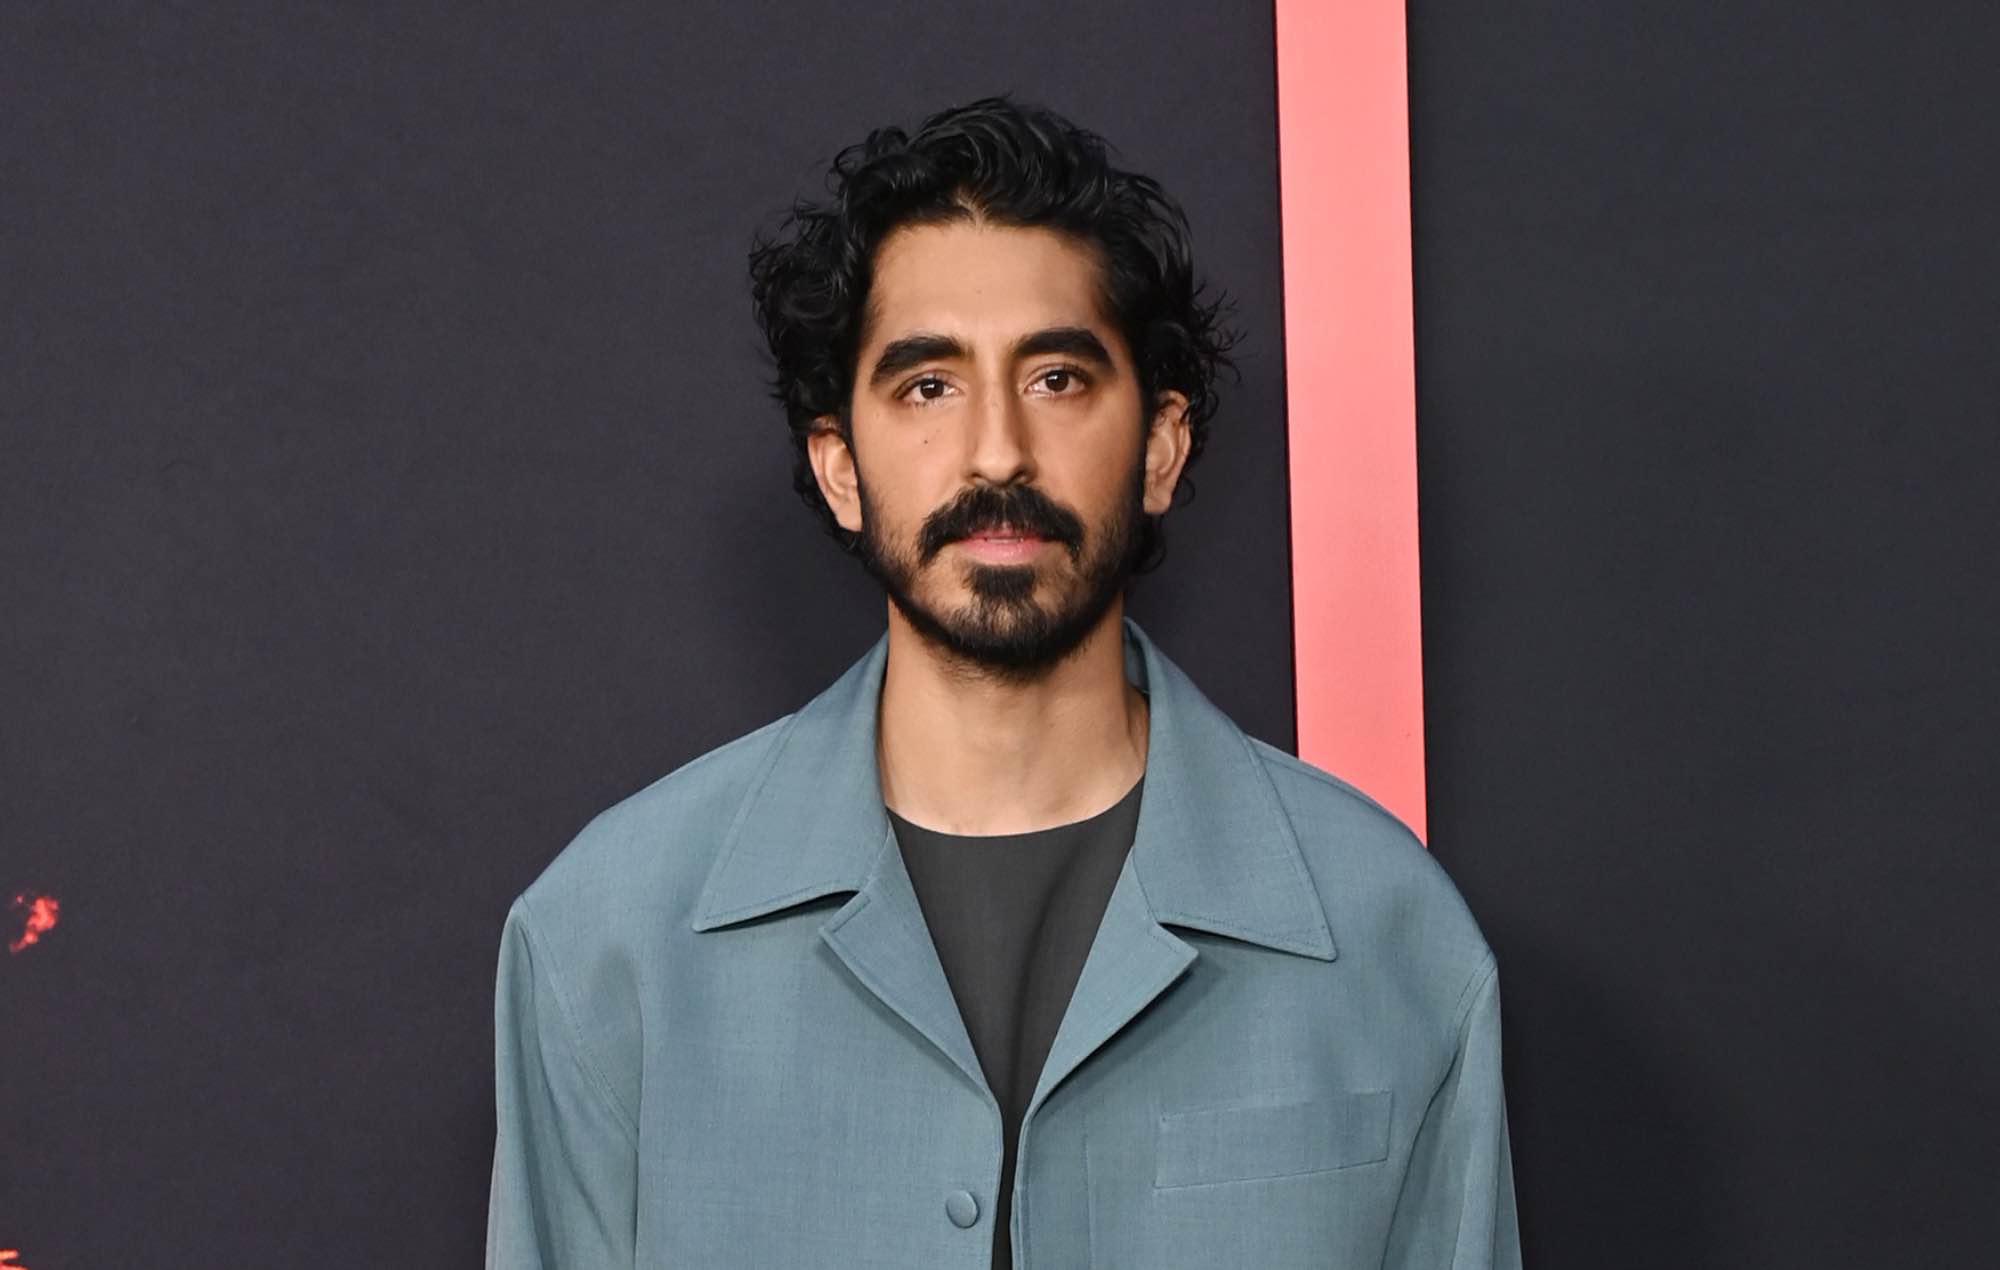 Dev Patel tells us about his obsession with Aldous Harding and Ben Howard